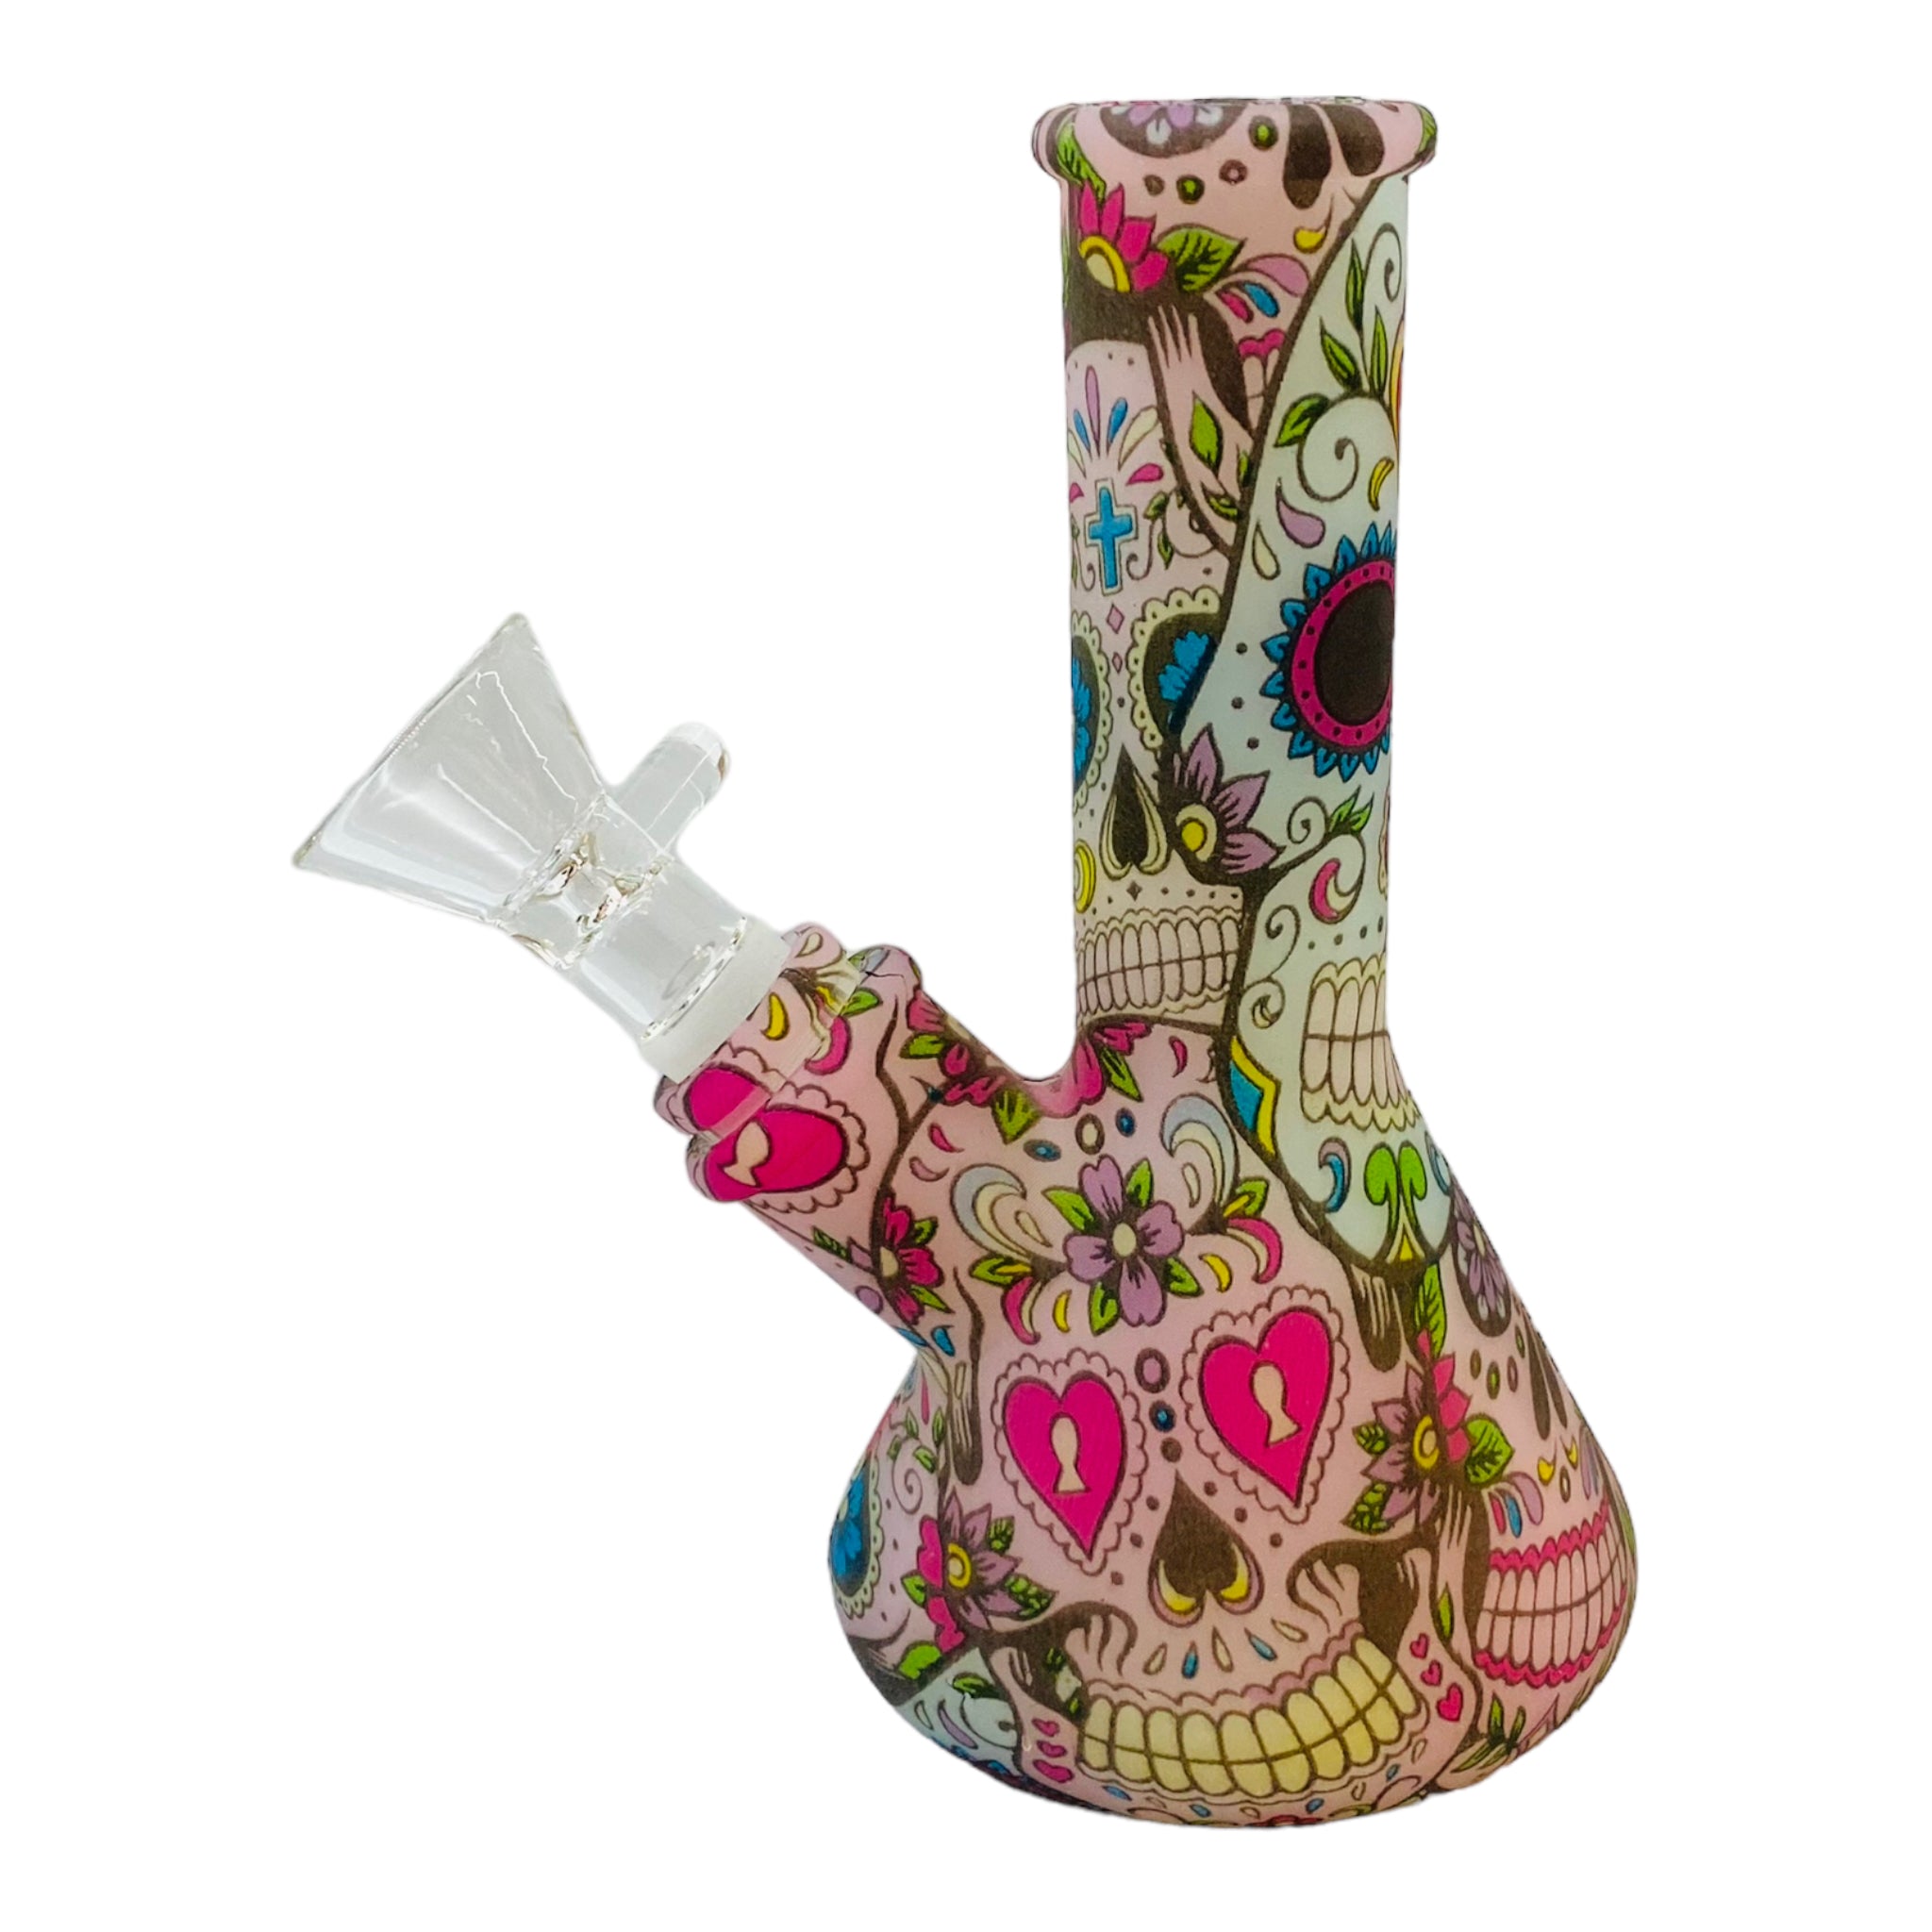 5 Inch Mini Silicone Bong With Dia De Los Muertos Or Day Of The Dead